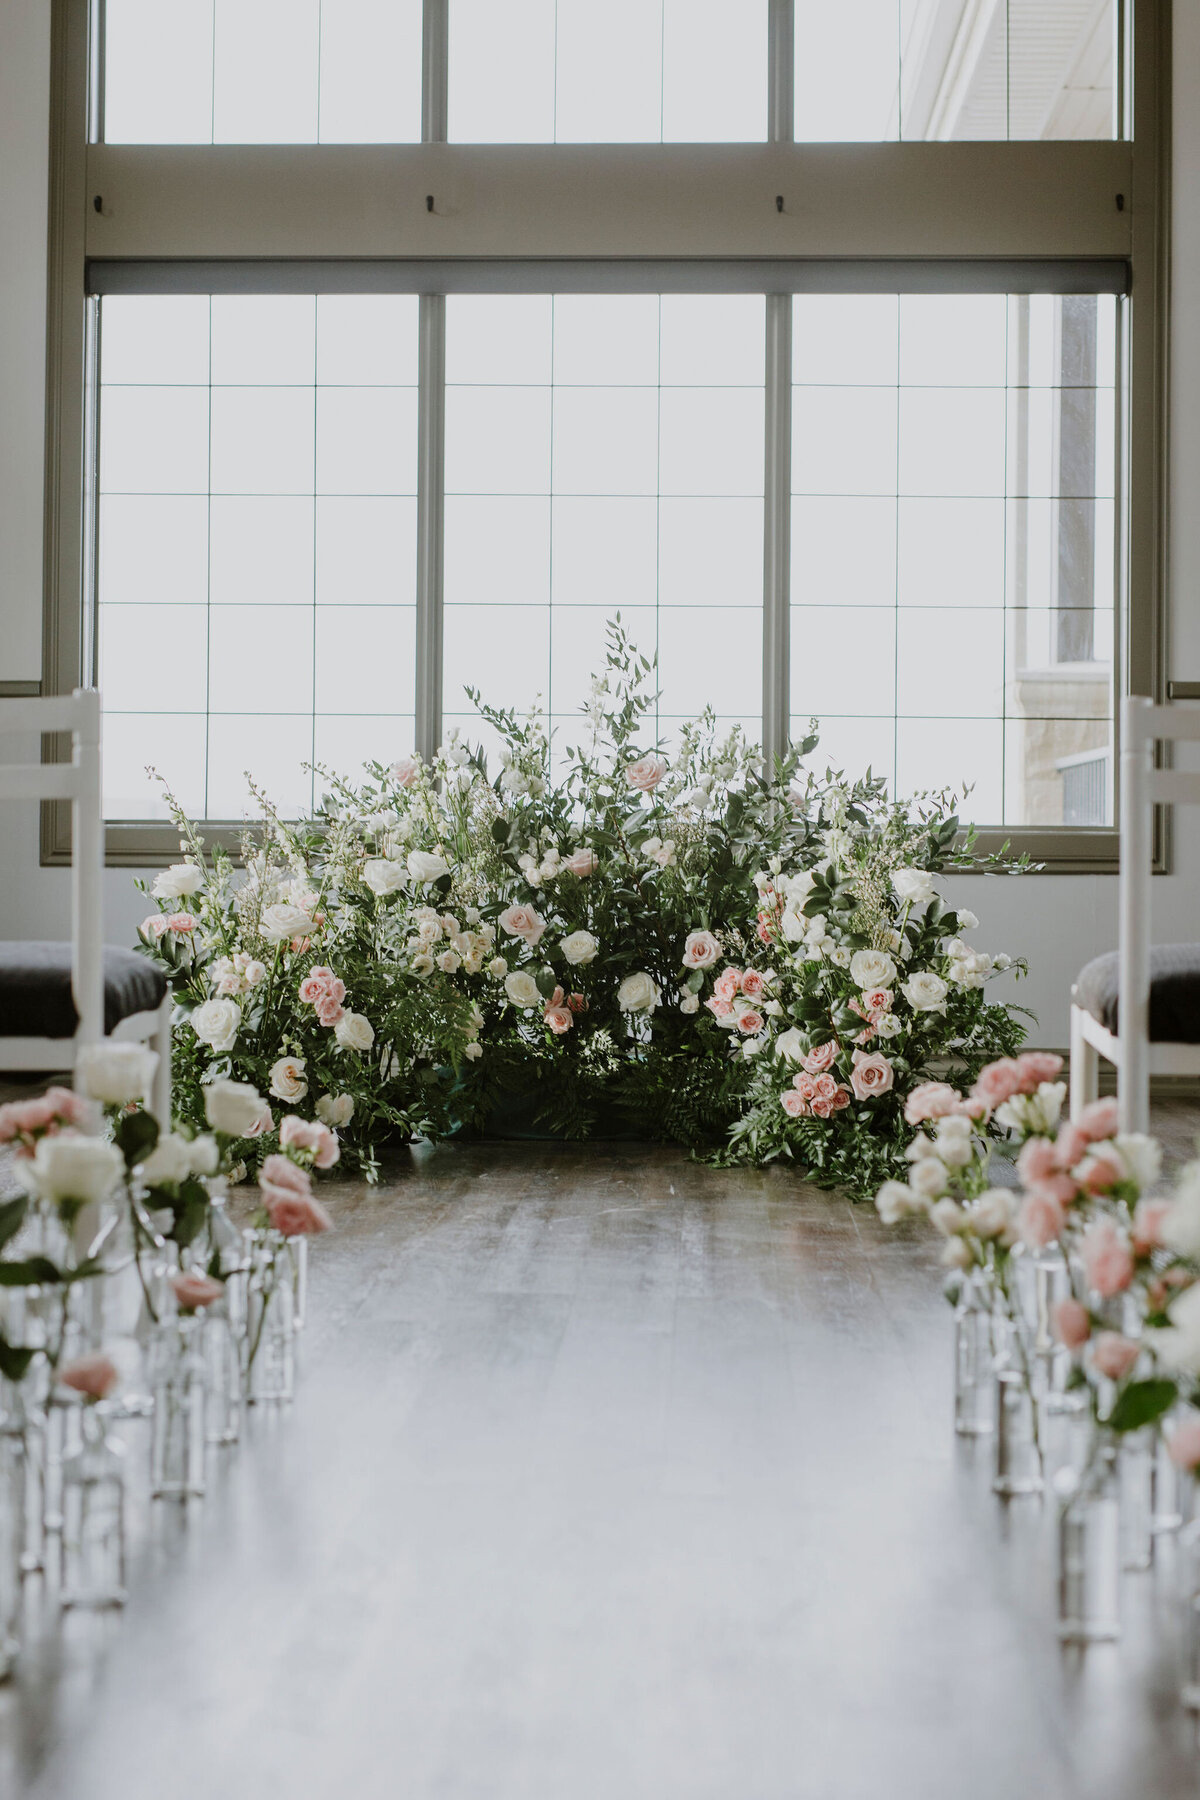 Stunning and romantic ceremony floral backdrop created by Hen & Chicks, classic Calgary, Alberta wedding florist, featured on the Brontë Bride Vendor Guide.